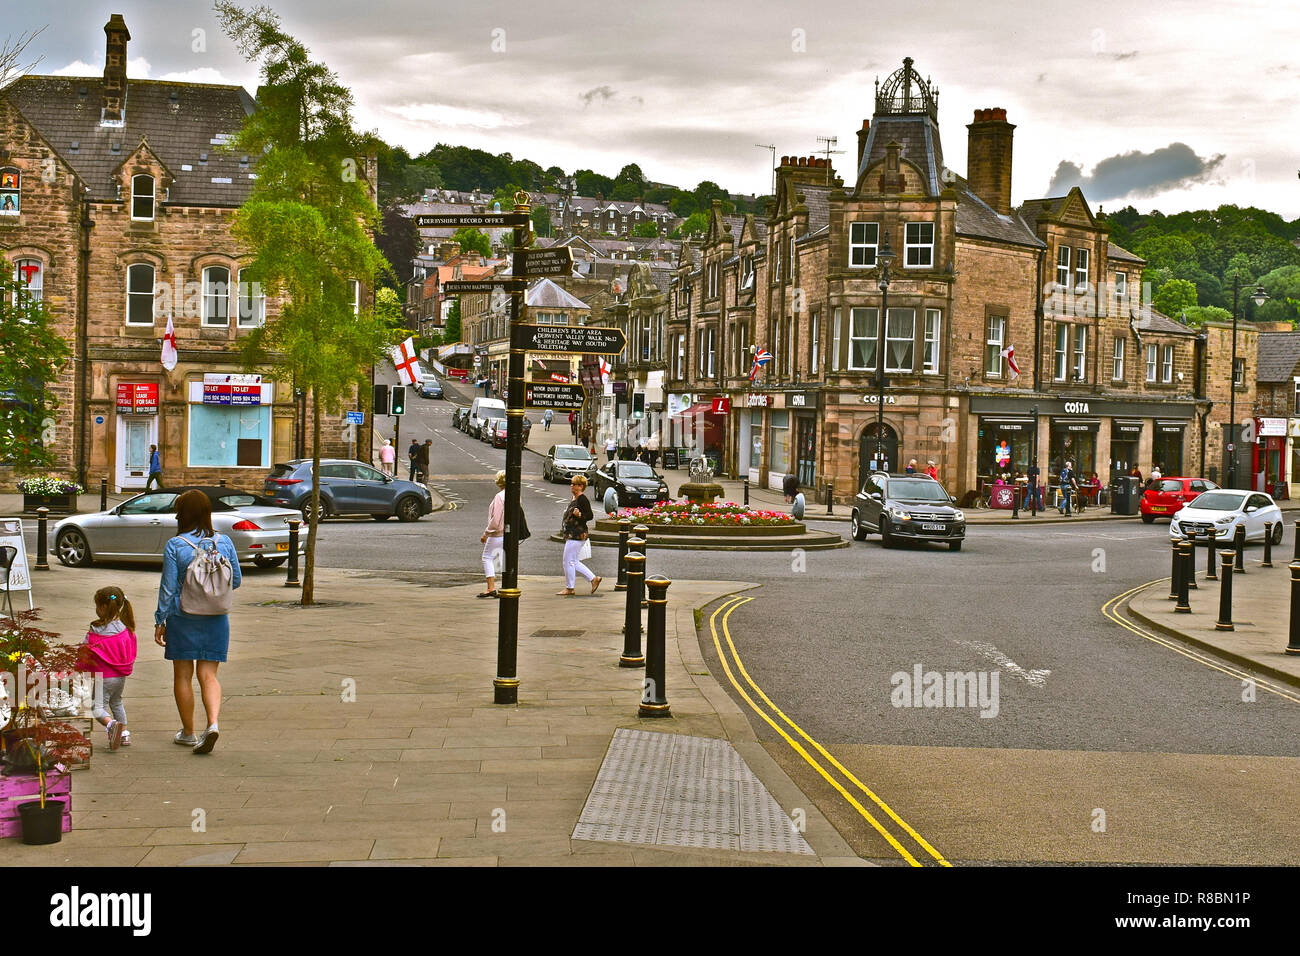 Pretty floral displays and attractive old buildings enhance this street view of the historic old Spa town centre of Matlock in Derbyshire. Stock Photo